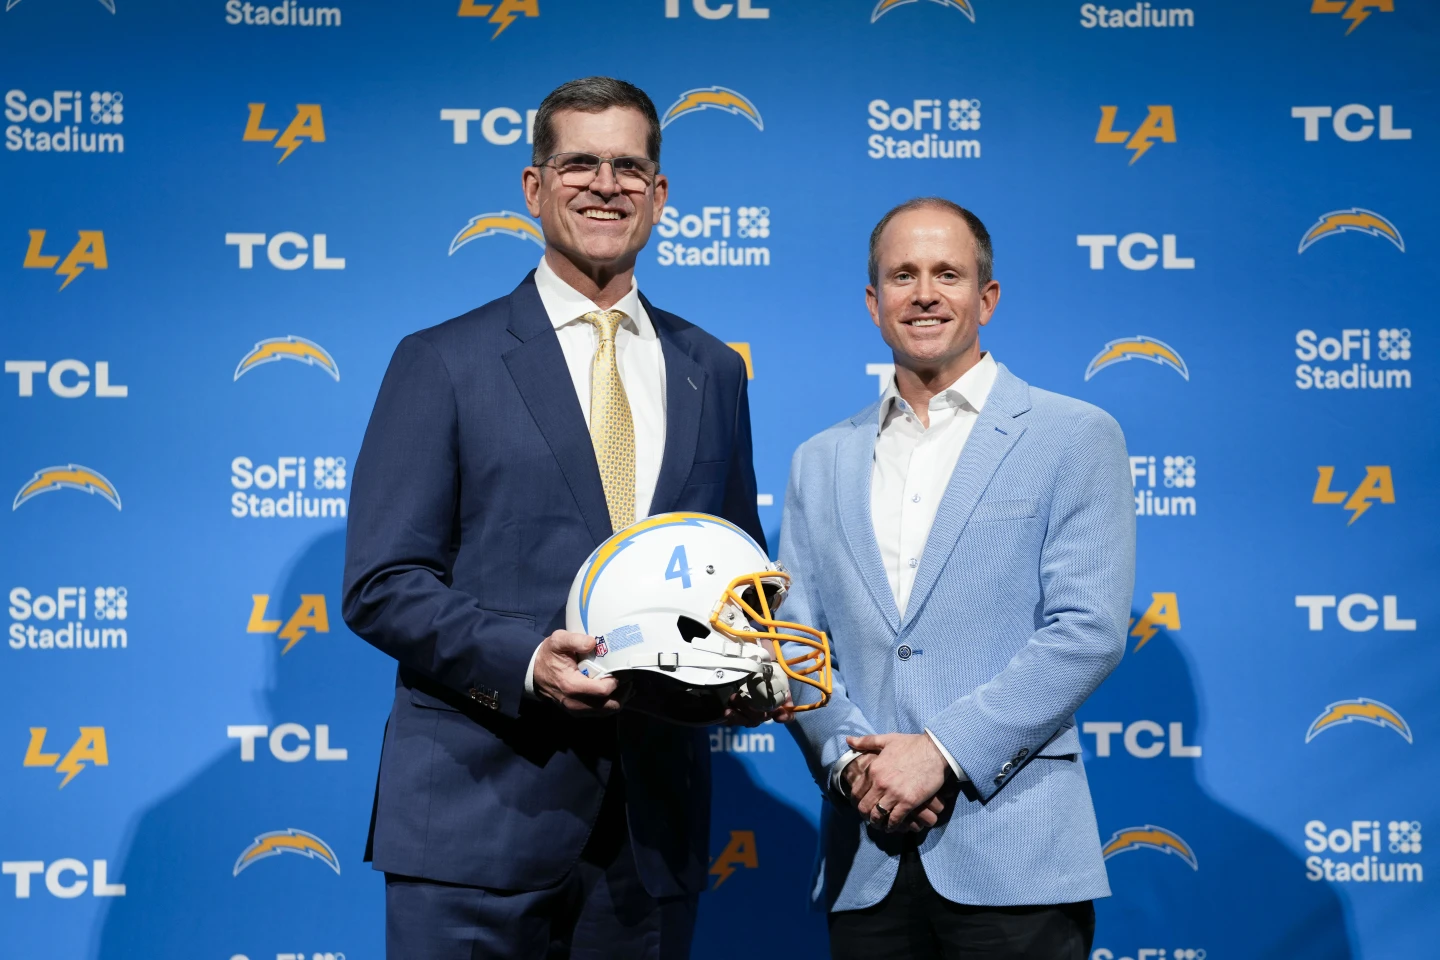 The Los Angeles Chargers introduced Jim Harbaugh (left) as head coach on Feb. 1; Harbaugh posed with John Spanos, head of business operations, for this photo. The Chargers are a team wanting very much to trade out of the No. 5 pick in next week's NFL Draft. (Photo by ASHLEY LANDIS / Courtesy of THE ASSOCIATED PRESS)